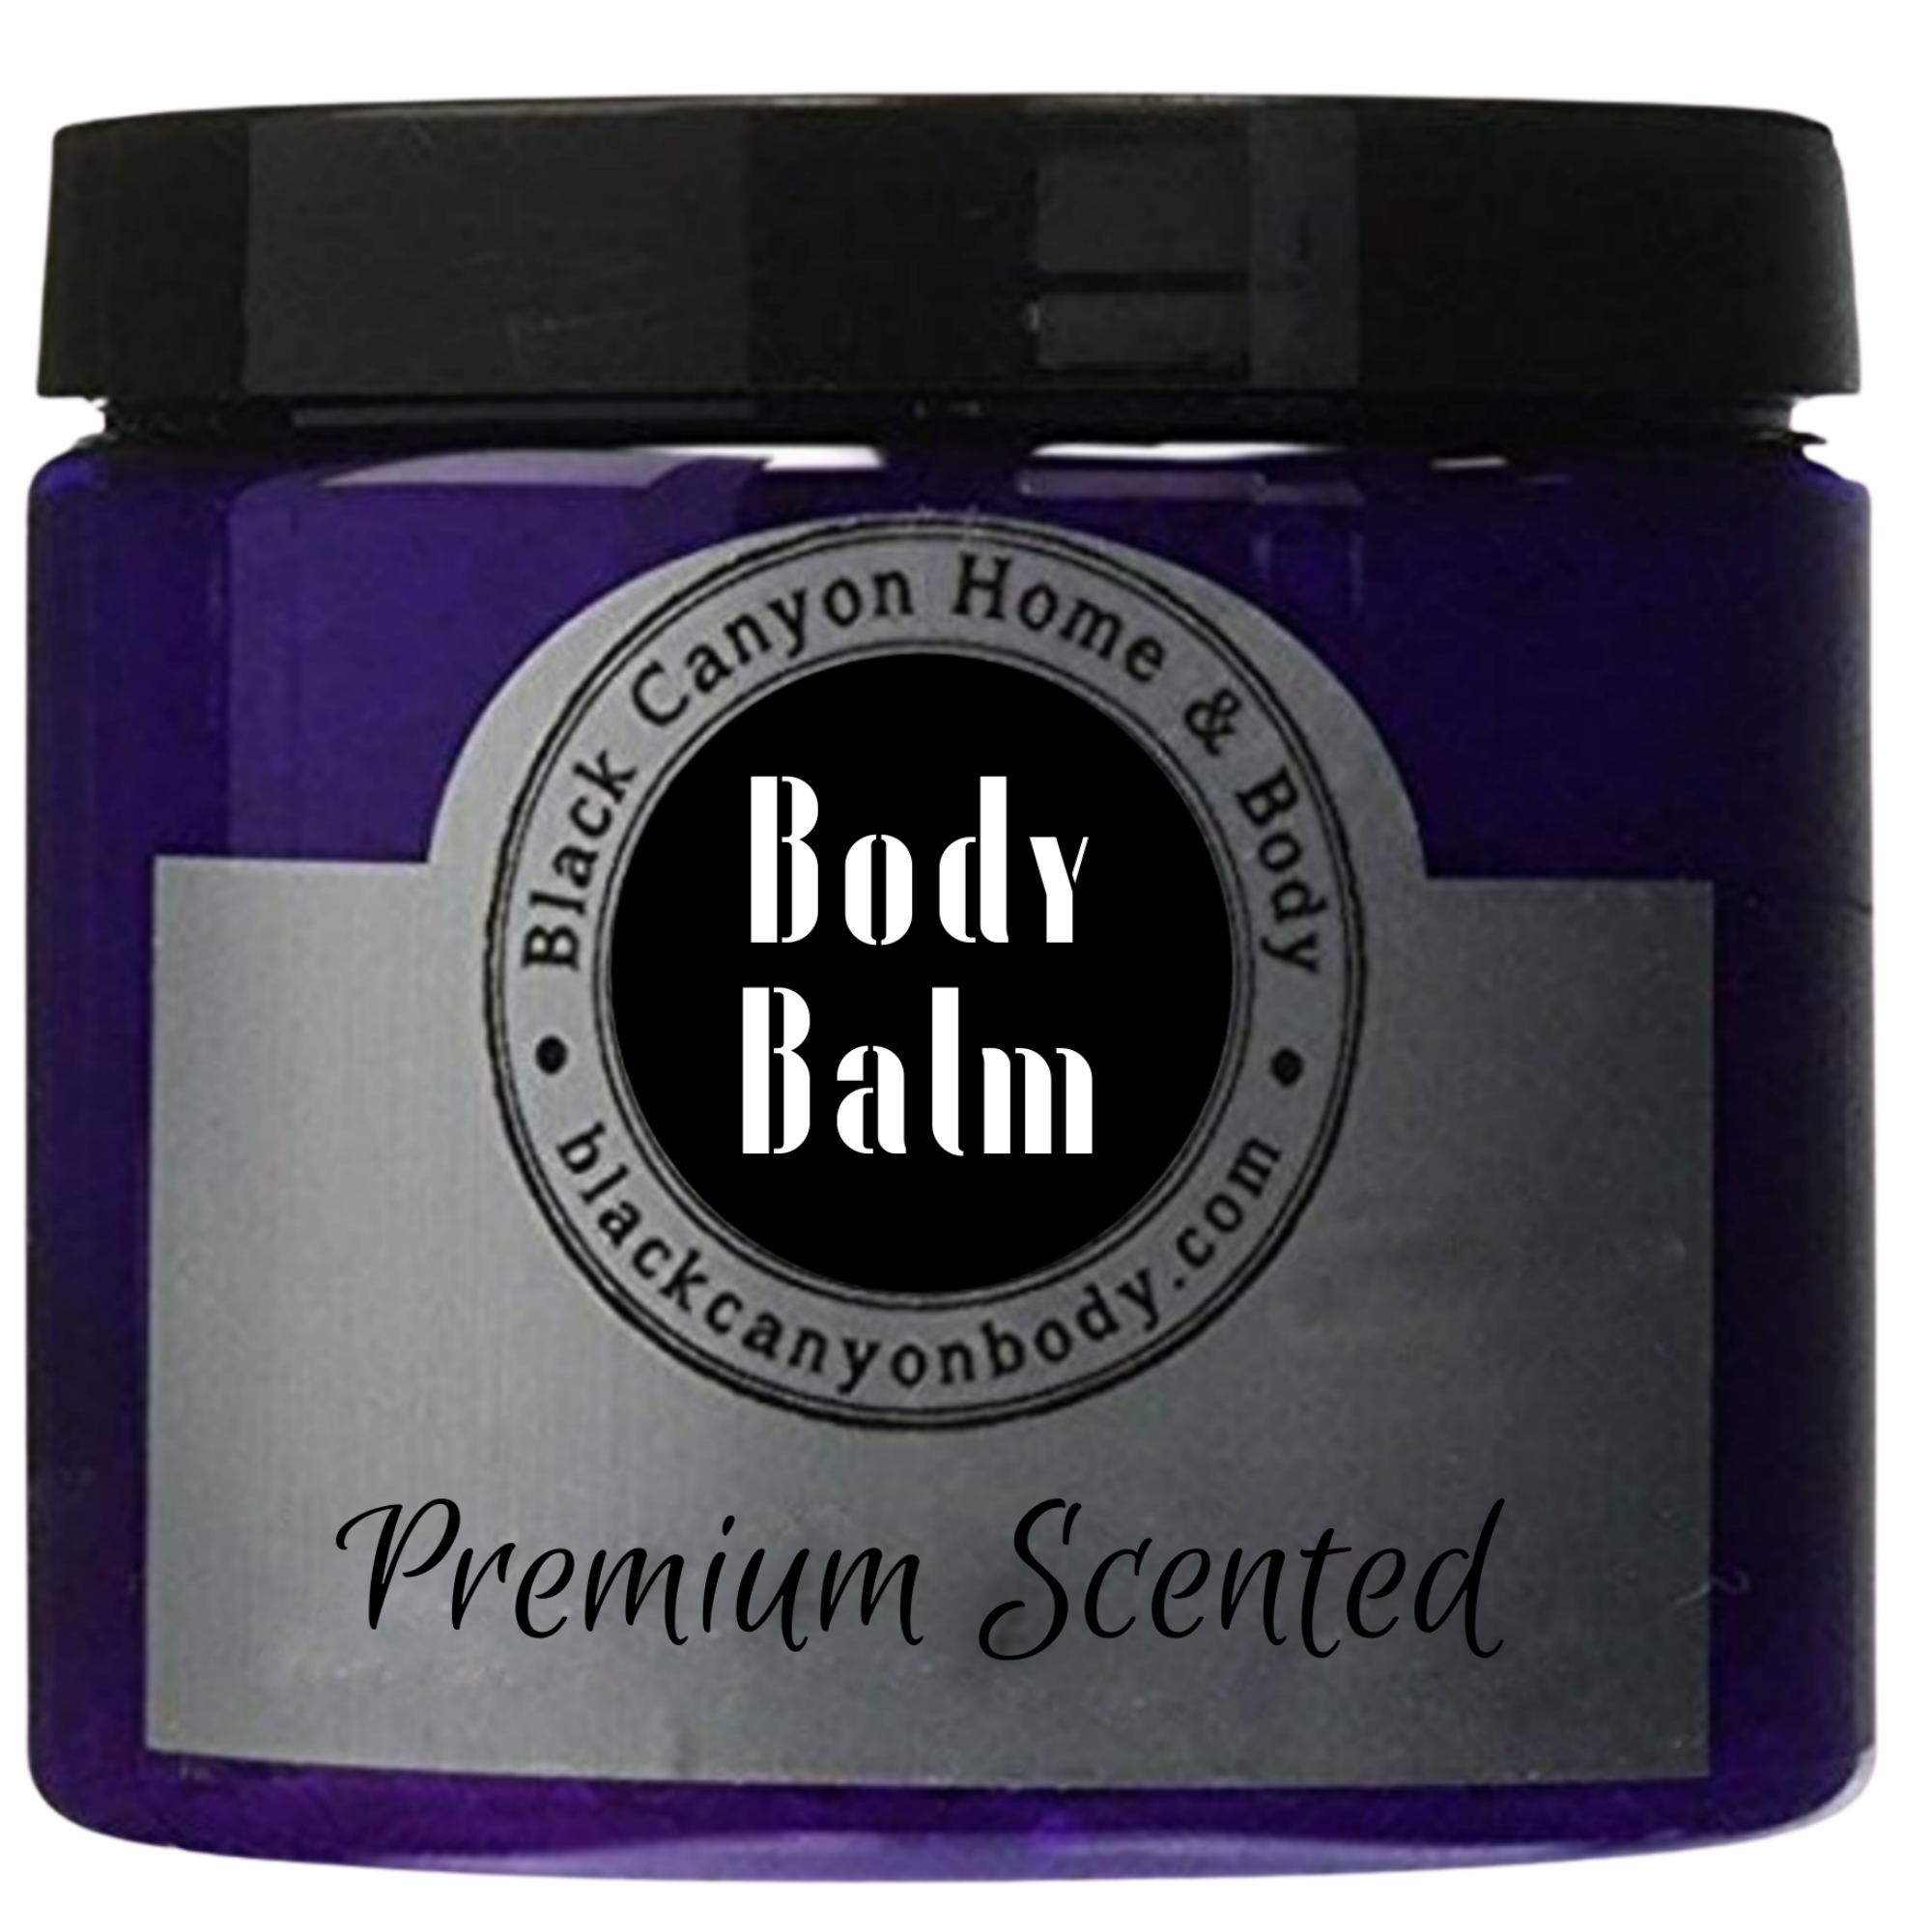 Paydens Cobalt Banana Leaf & Pimento Scented Natural Body Balm with Shea For Men